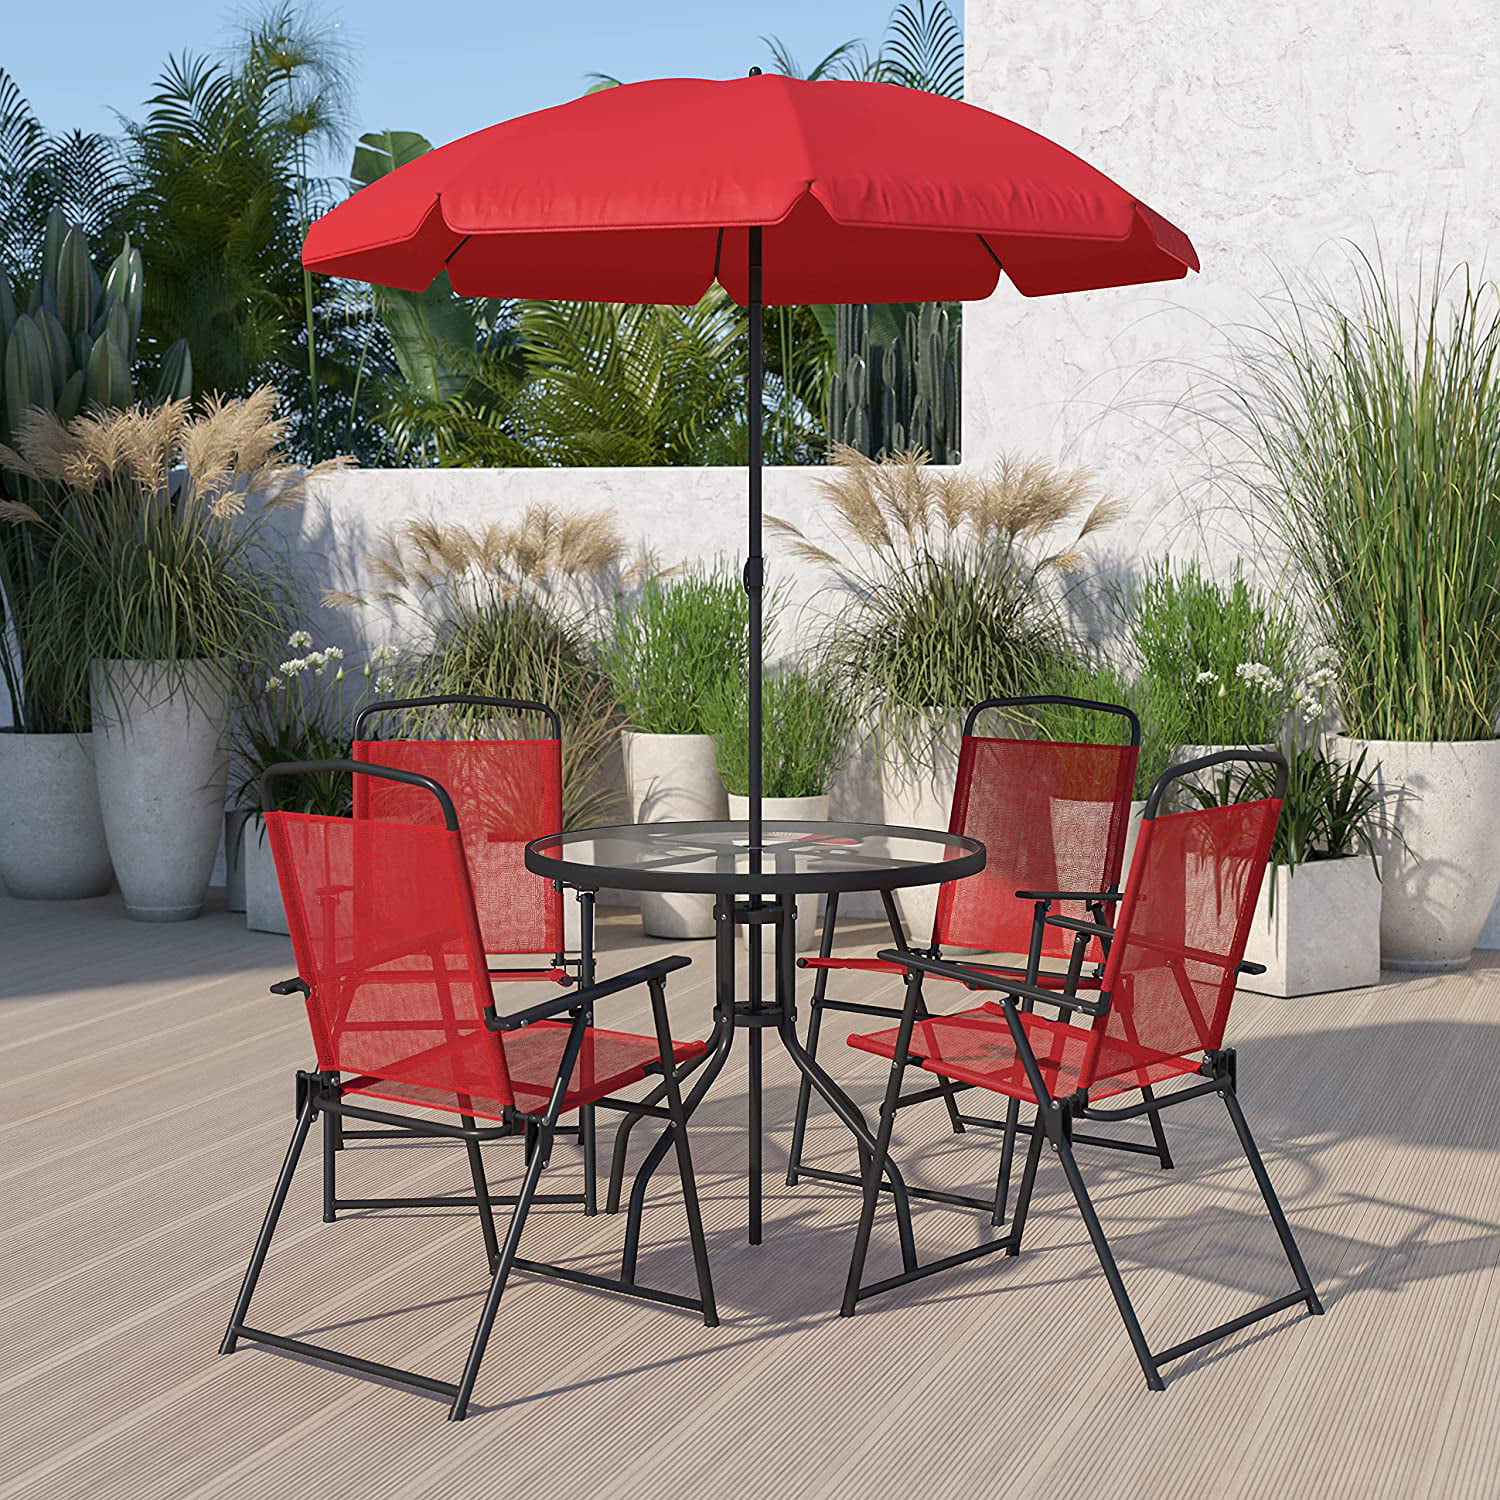 Details about   6 Piece Outdoor Patio Dining Set Red With Umbrella Tempered Glass 